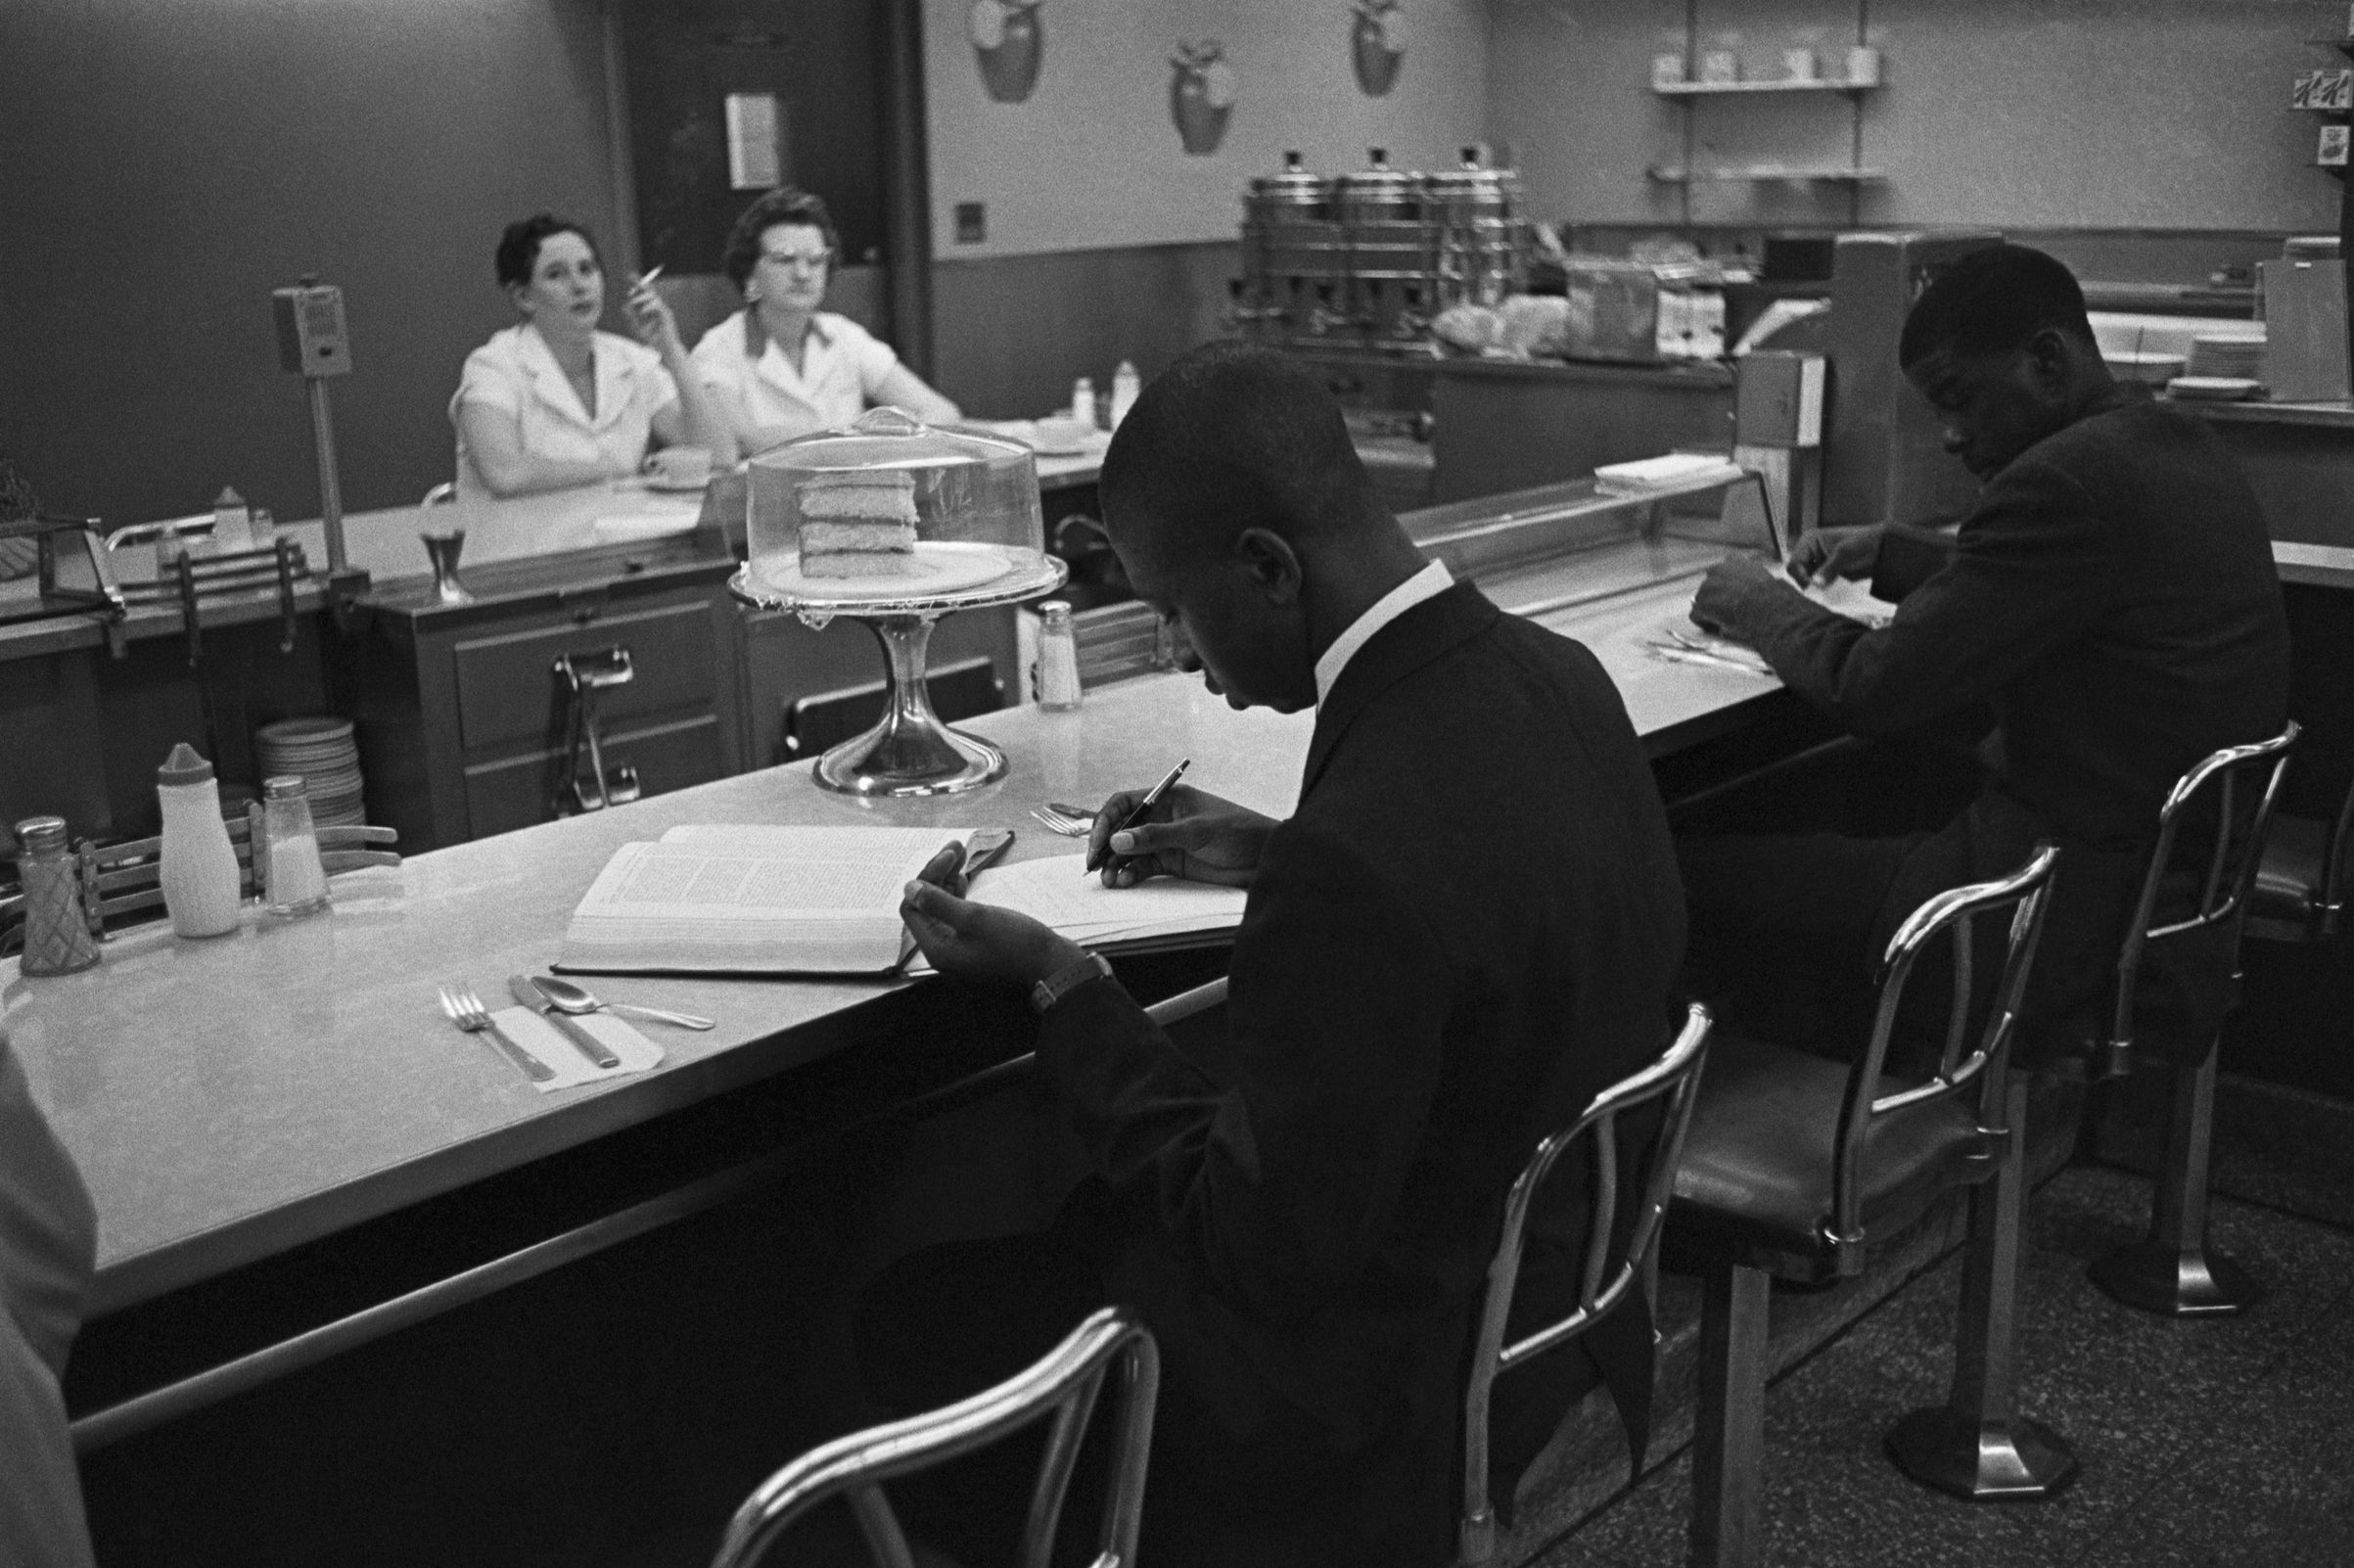 African-American students from Saint Augustine College study while participating in a sit-in at a lunch counter reserved for white customers in Raleigh, N.C. (Bettmann Archive/Getty Images)